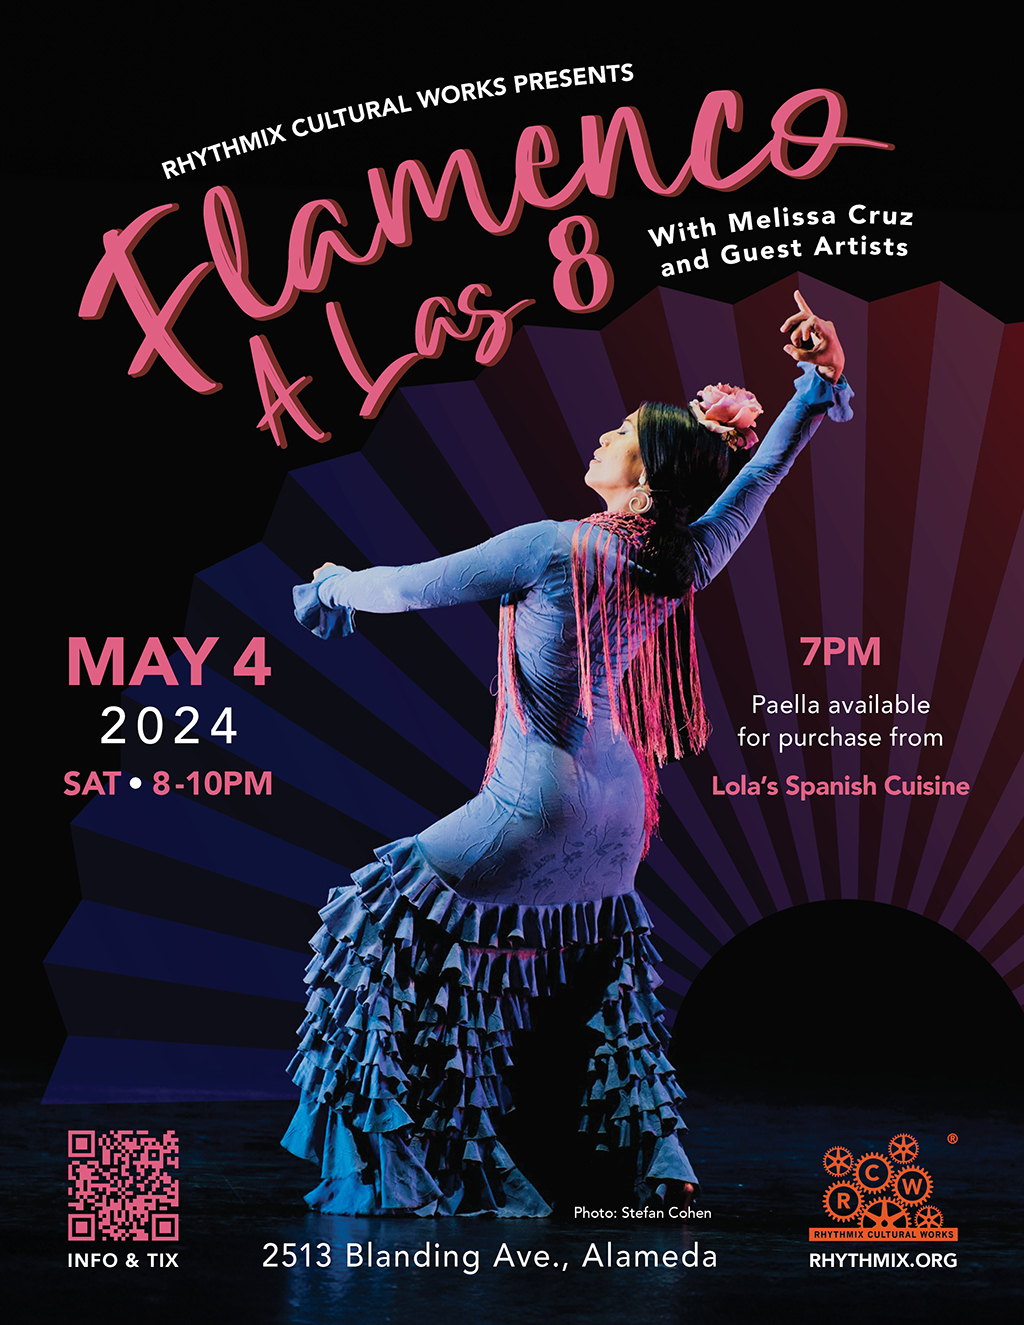 Rhythmix Cultural Works Join us for an Evening of Culture with Melissa Cruz and Guest Artists promotion flier on Digifli com